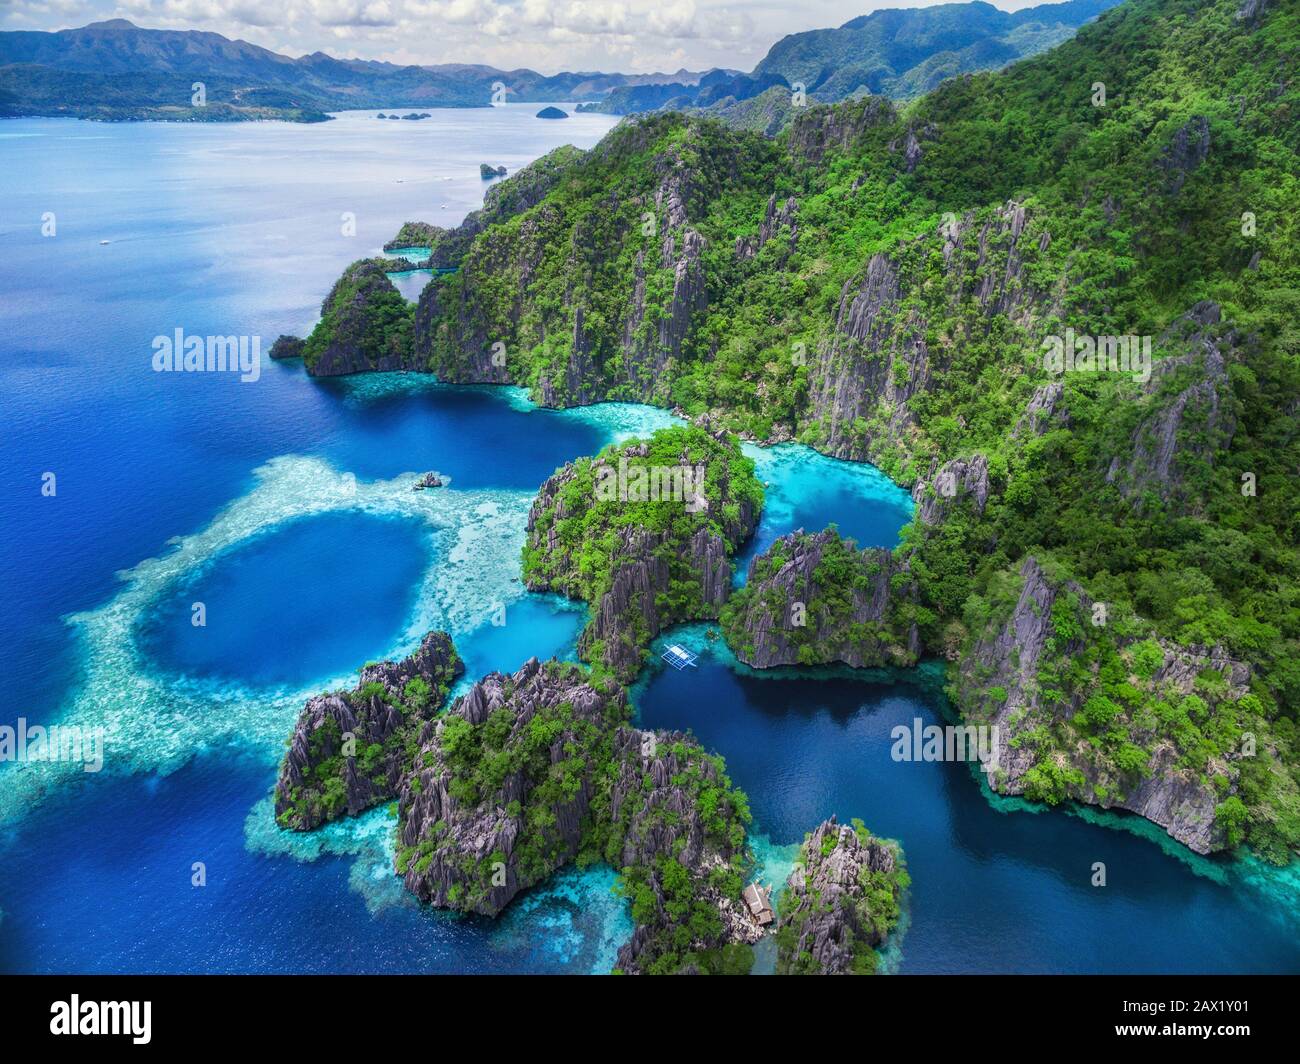 Palawan, Philippines, aerial view of lakes and limestones cliffs in Coron island. Stock Photo